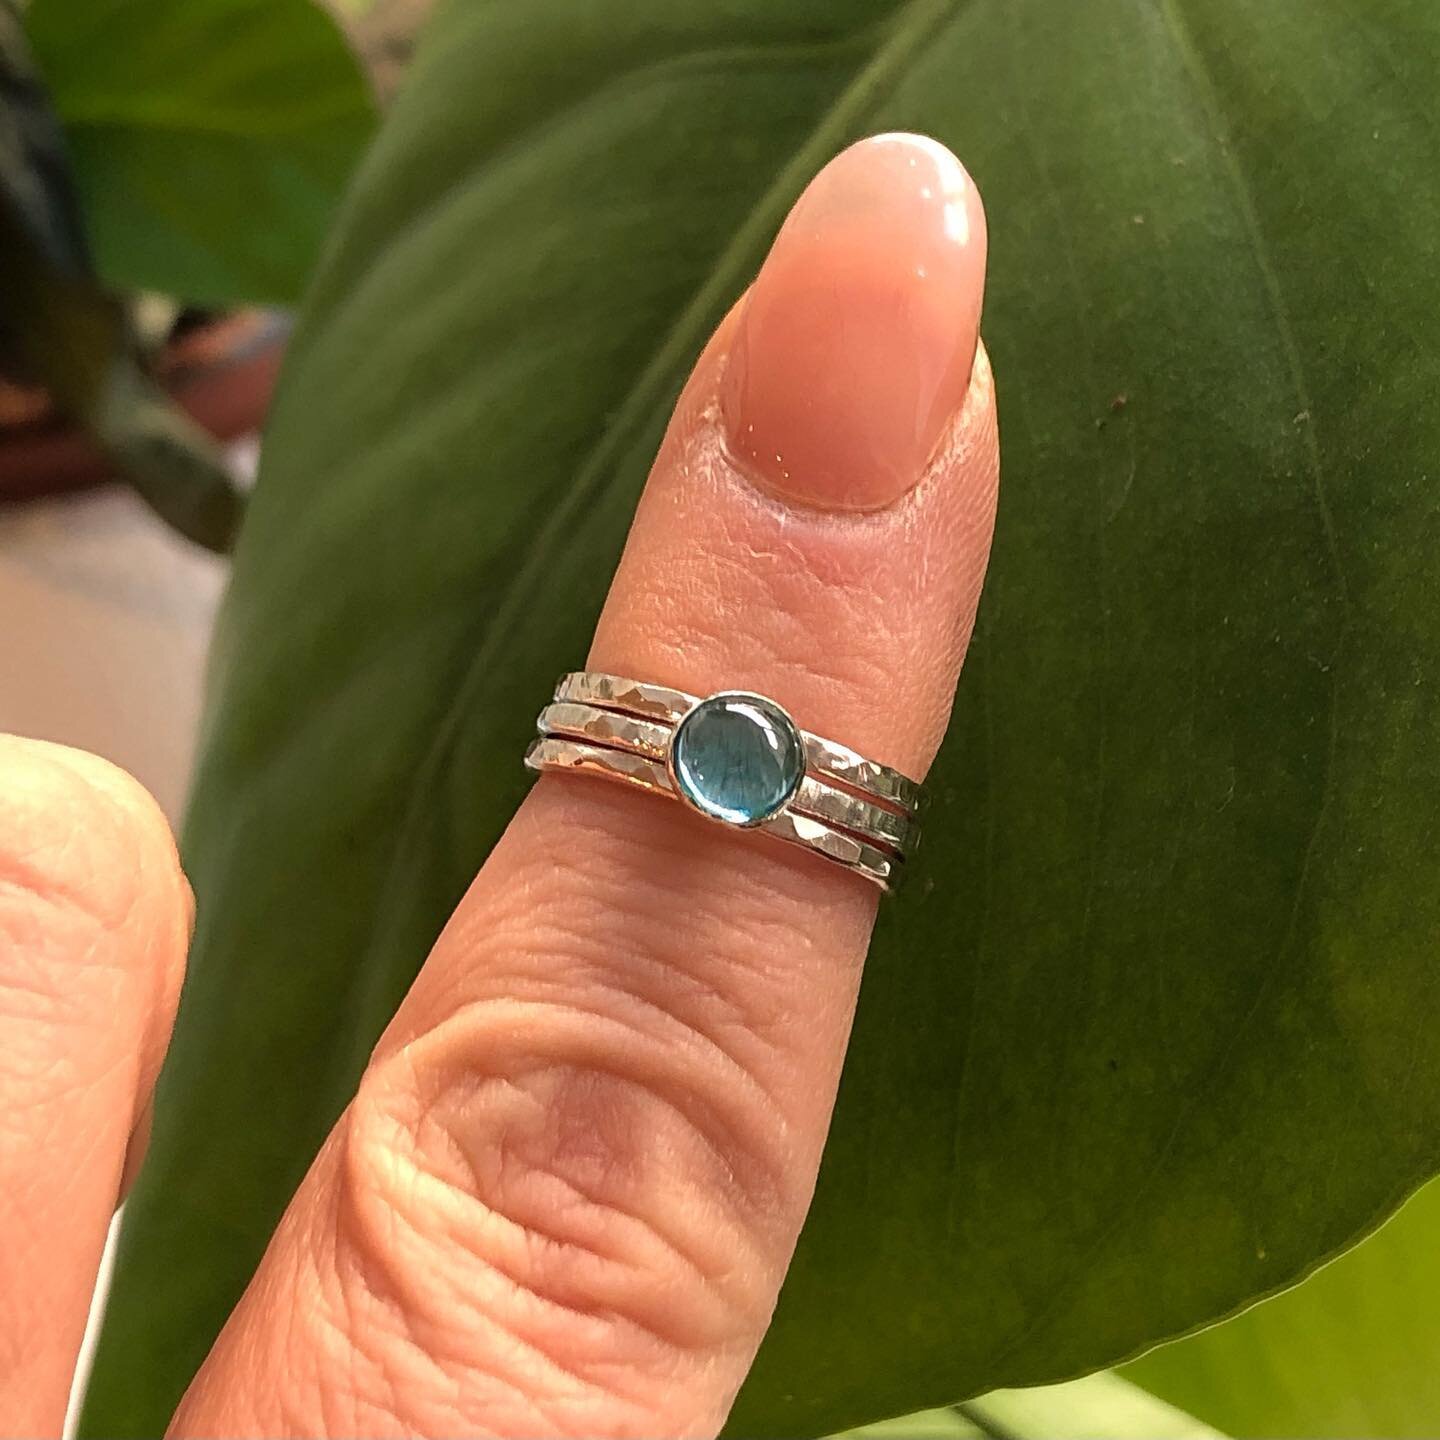 Today&rsquo;s Gemstone stackers was NOT without it&rsquo;s challenges due to a choice of too many gemstones (some of which were annoying uncalibrated 🙄) but we had a hoot.
And just look at these beautiful results! 
I do teach this class to beginners